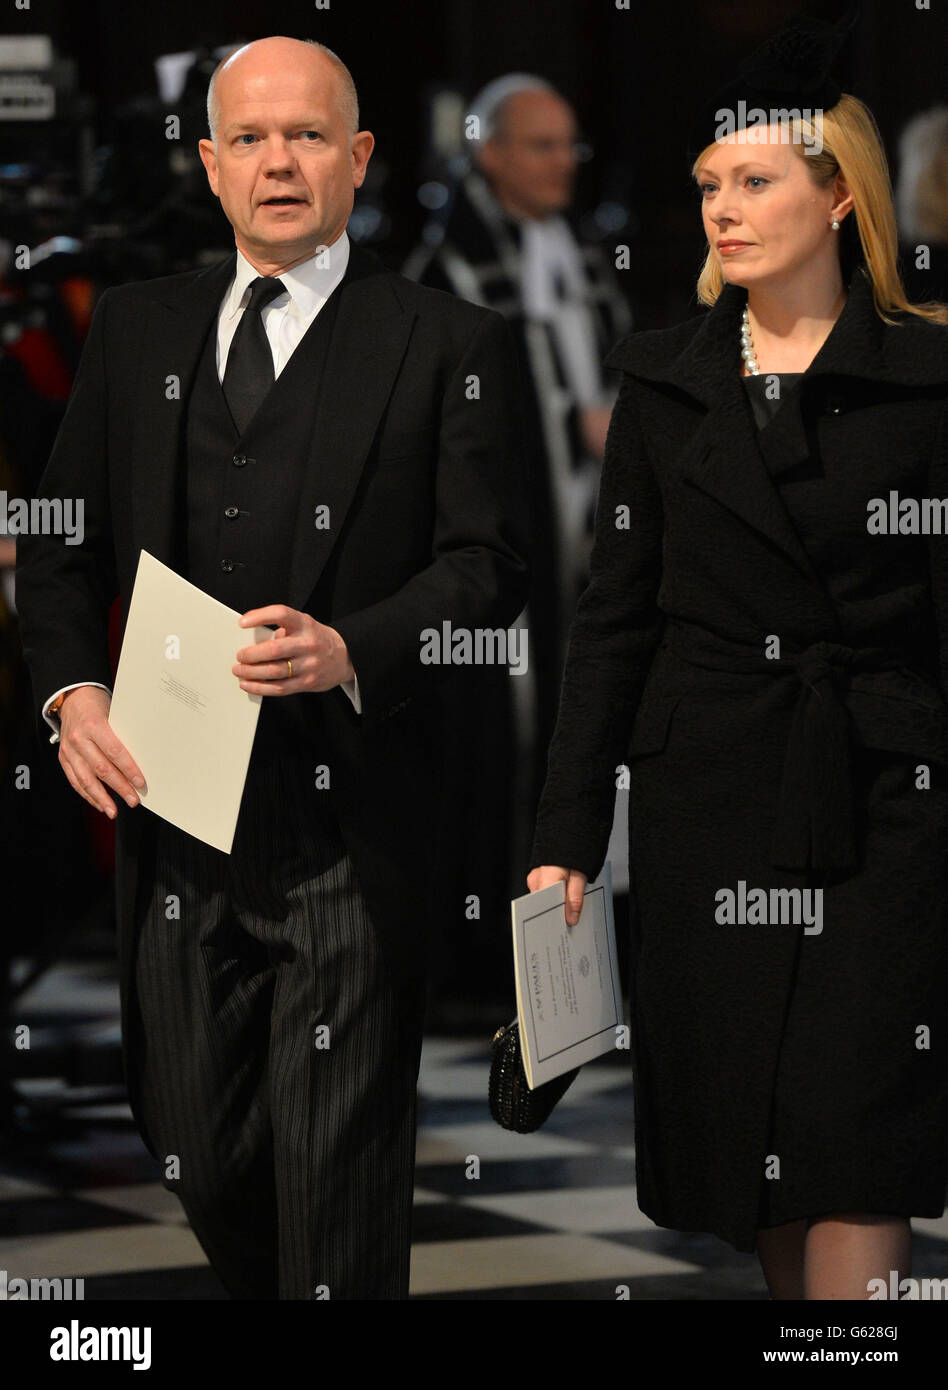 British Foreign Secretary William Hague (L) and wife Ffion Jenkins (R) attend the funeral service of Baroness Thatcher, at St Paul's Cathedral, central London. Stock Photo